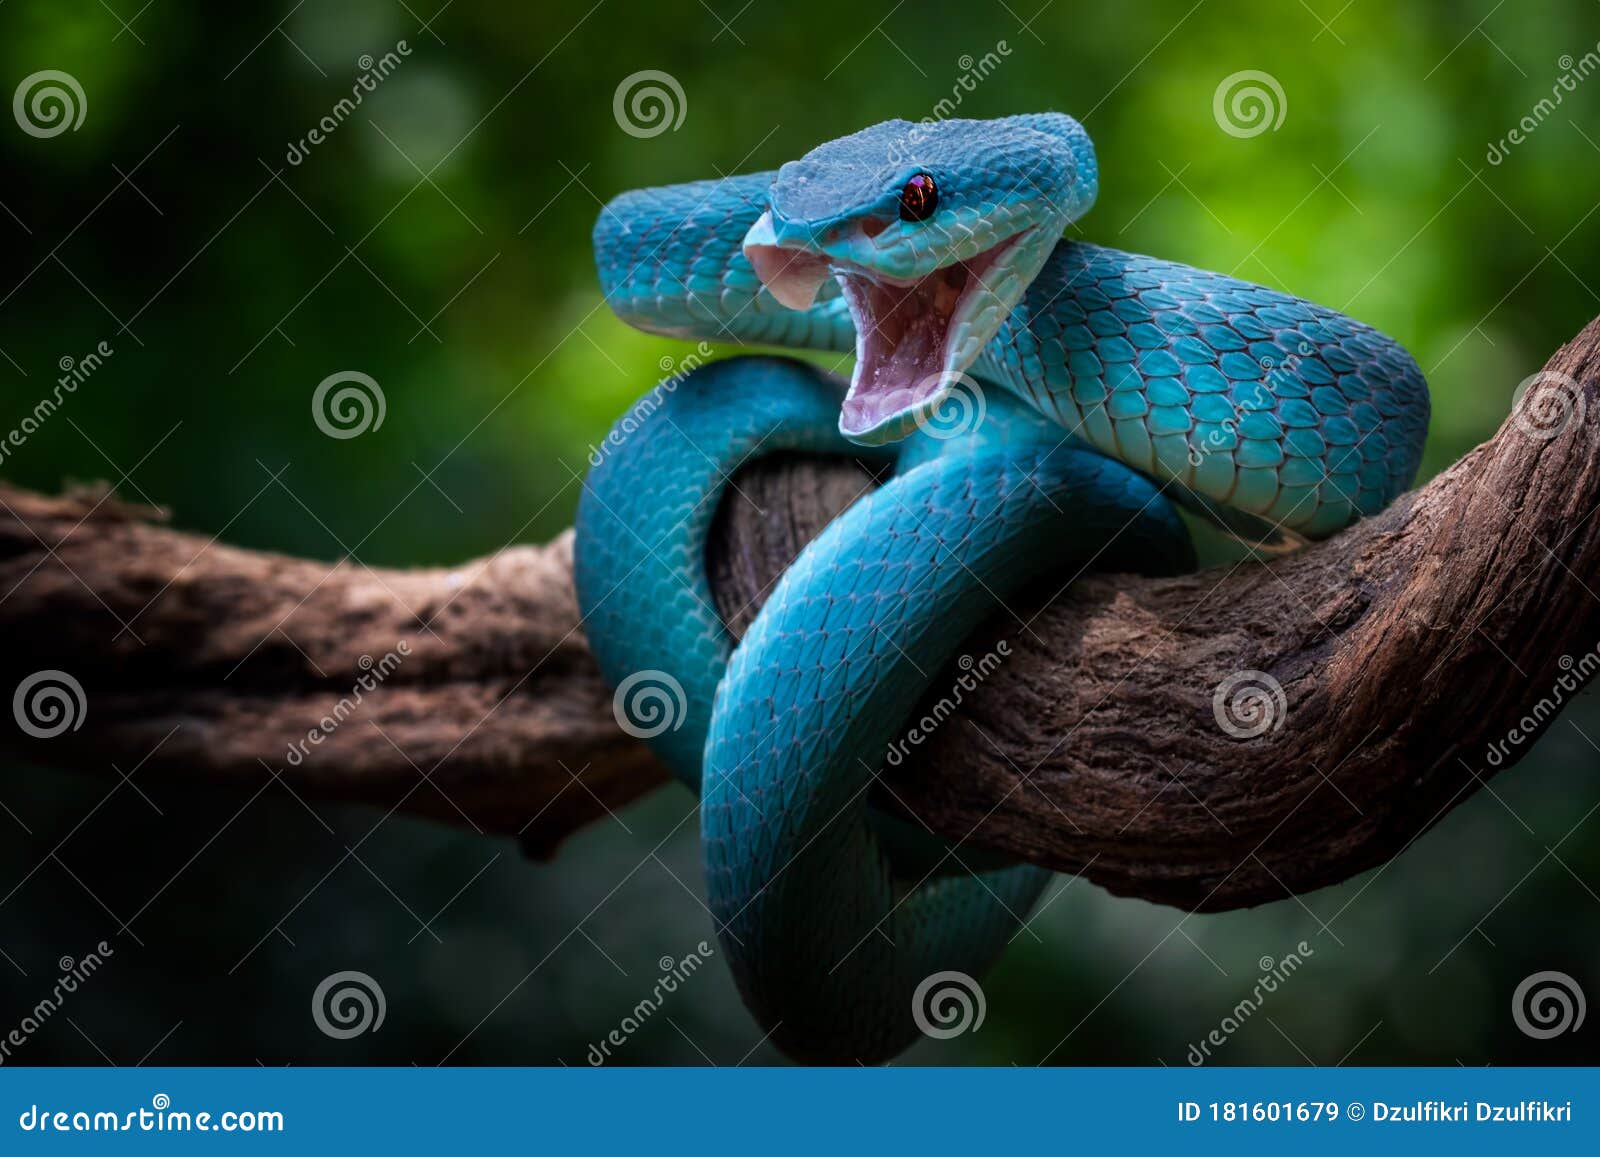 attack position, a blue viper ready to attack anything , nature, macro, snake